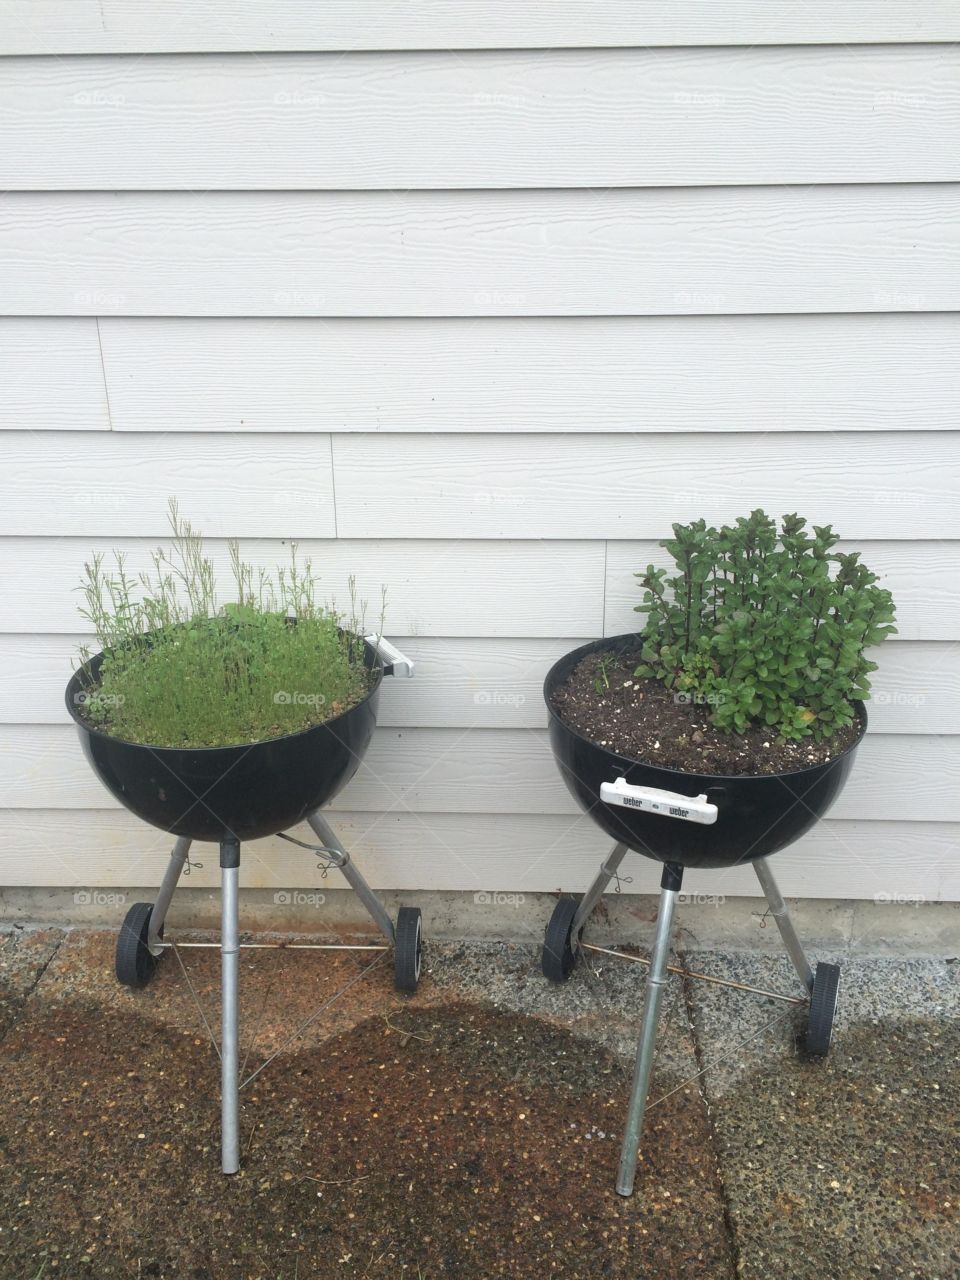 Plants growing out of barbecue grills